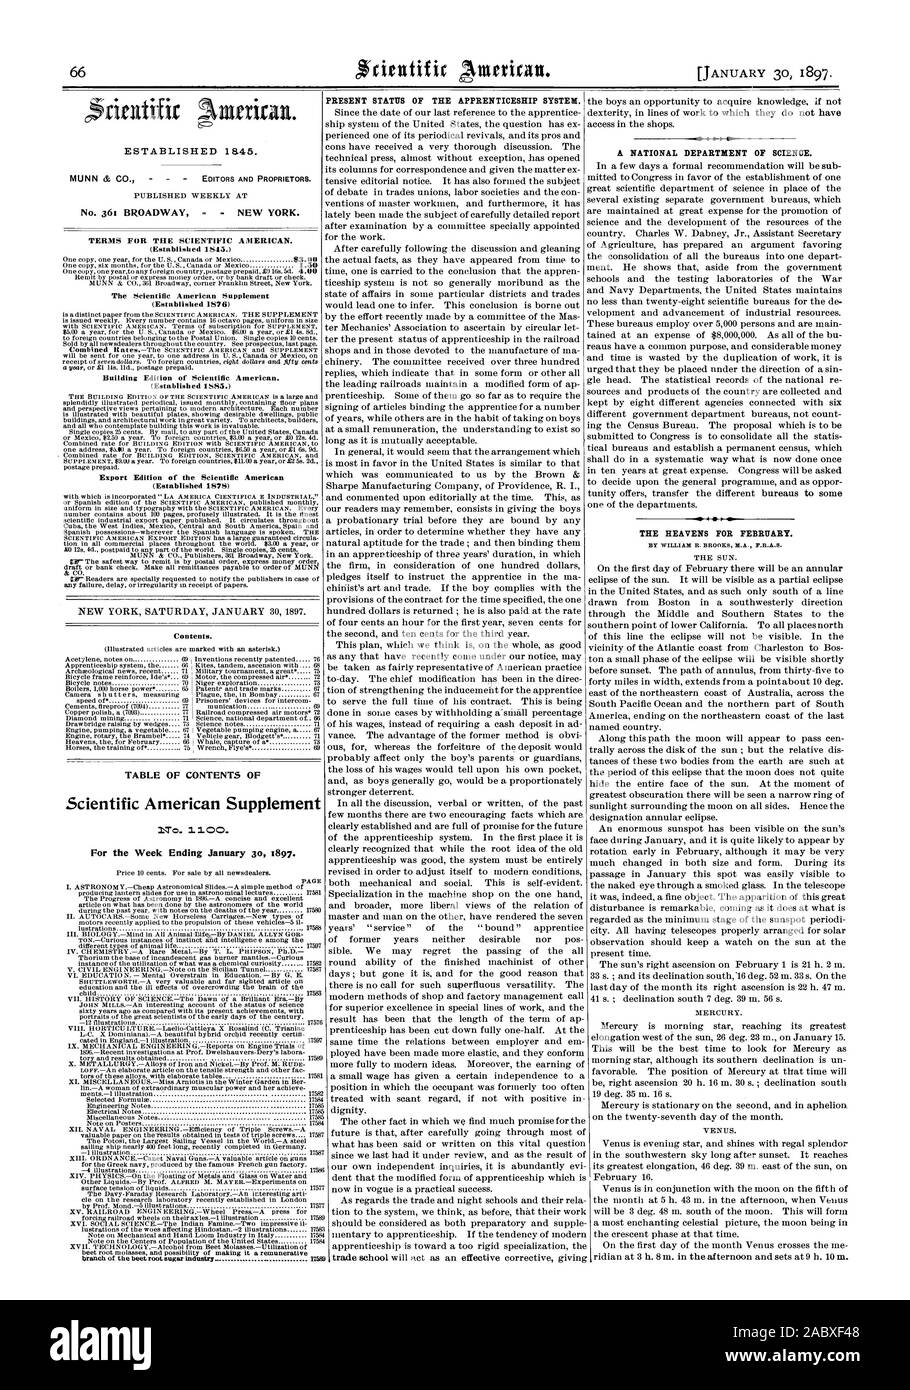 PRESENT STATUS OF THE APPRENTICESHIP SYSTEM. THE HEAVENS FOR FEBRUARY. ESTABLISHED 1845. Contents. TABLE OF CONTENTS OF Scientific American Supplement 1To. 00. For the Week Ending January 30 1897. A NATIONAL DEPARTMENT OF SCIENCE., 1897-01-30 Stock Photo